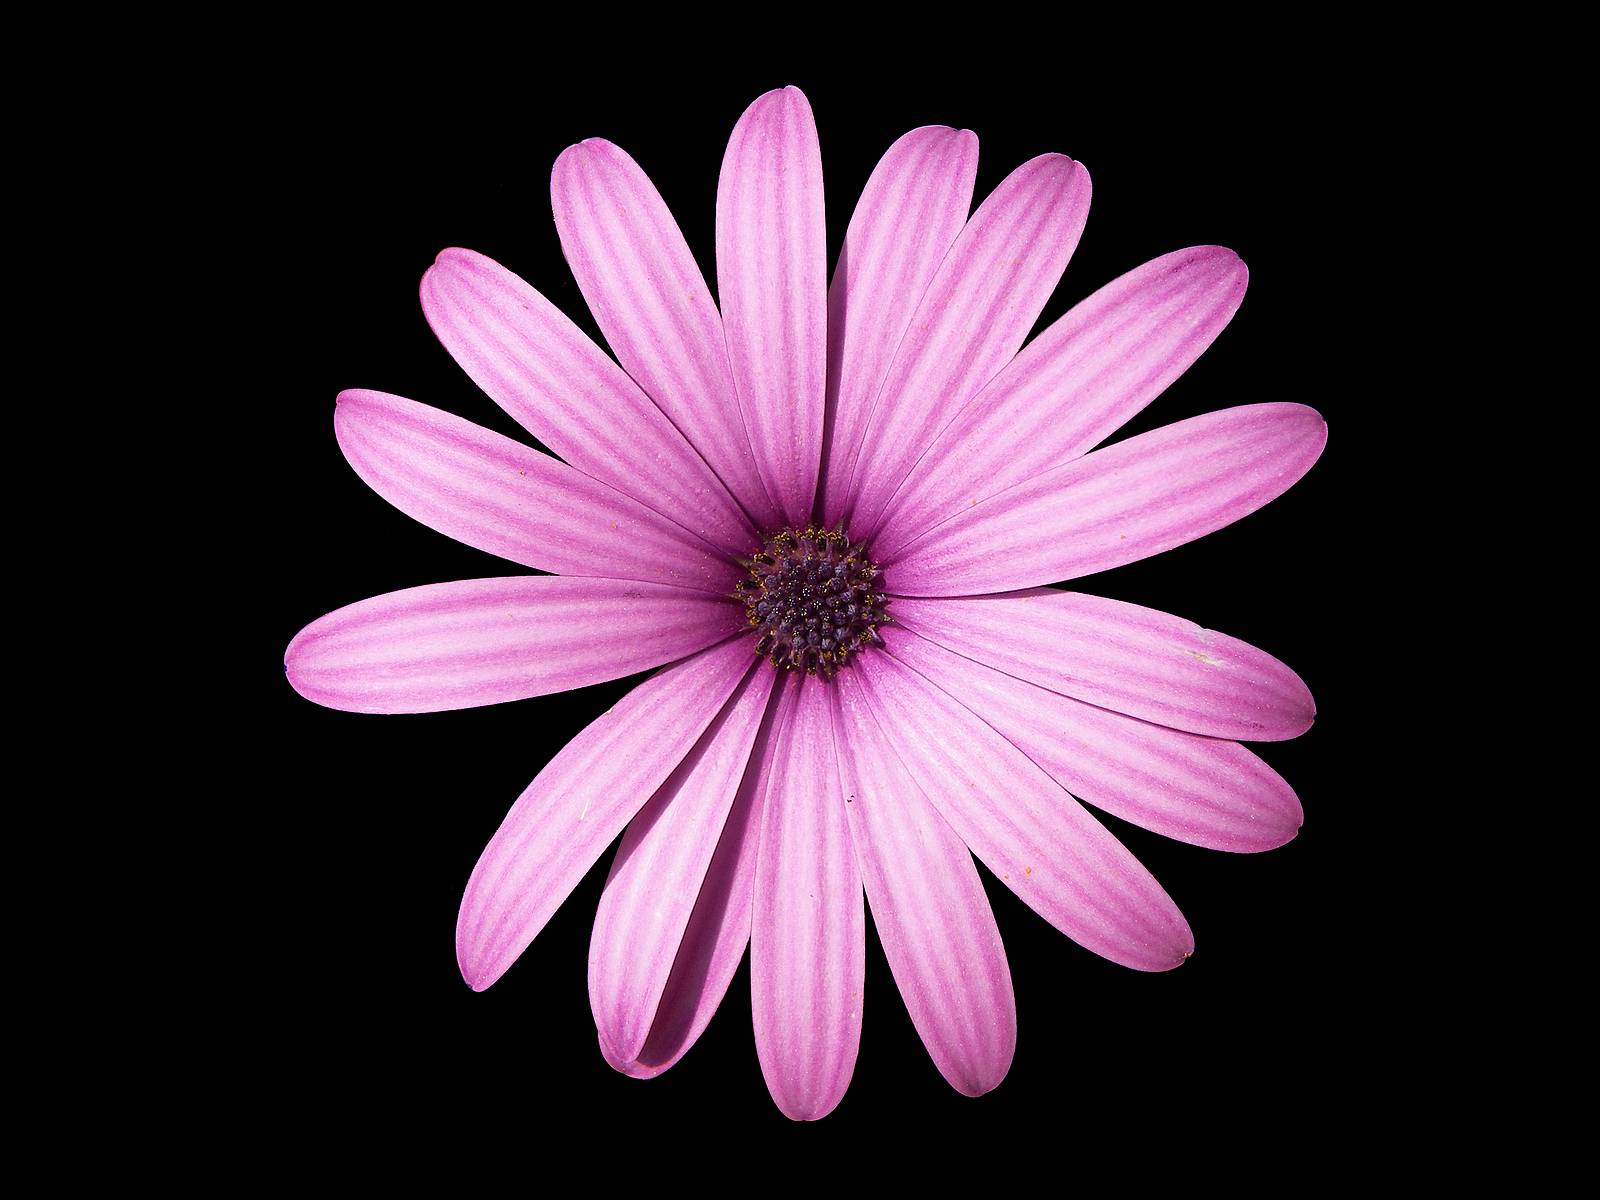 Black and Pink Flower Wallpapers - Top Free Black and Pink Flower